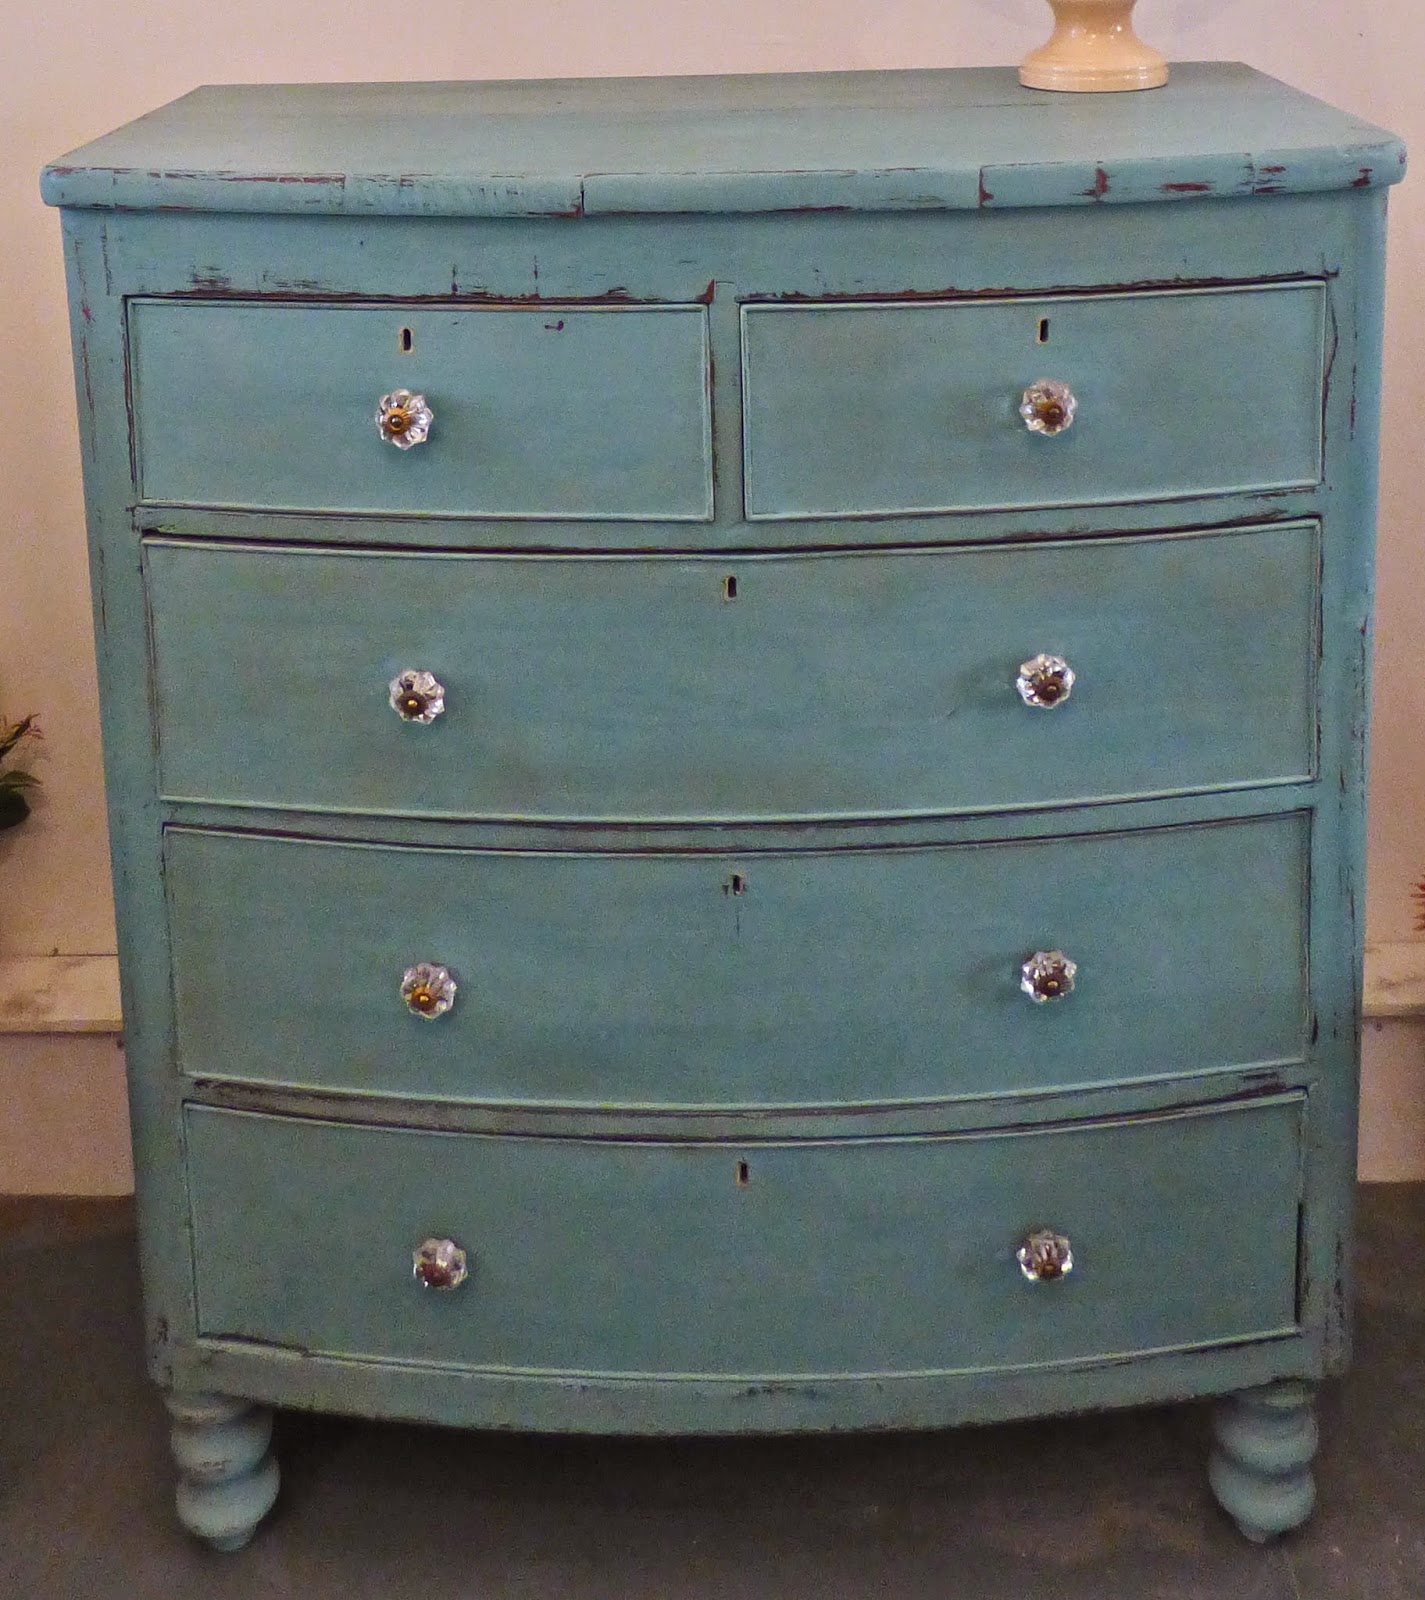 ChouChou Vintage: Chippy, Shabby, Antique Mahogany Painted Chest of Drawers